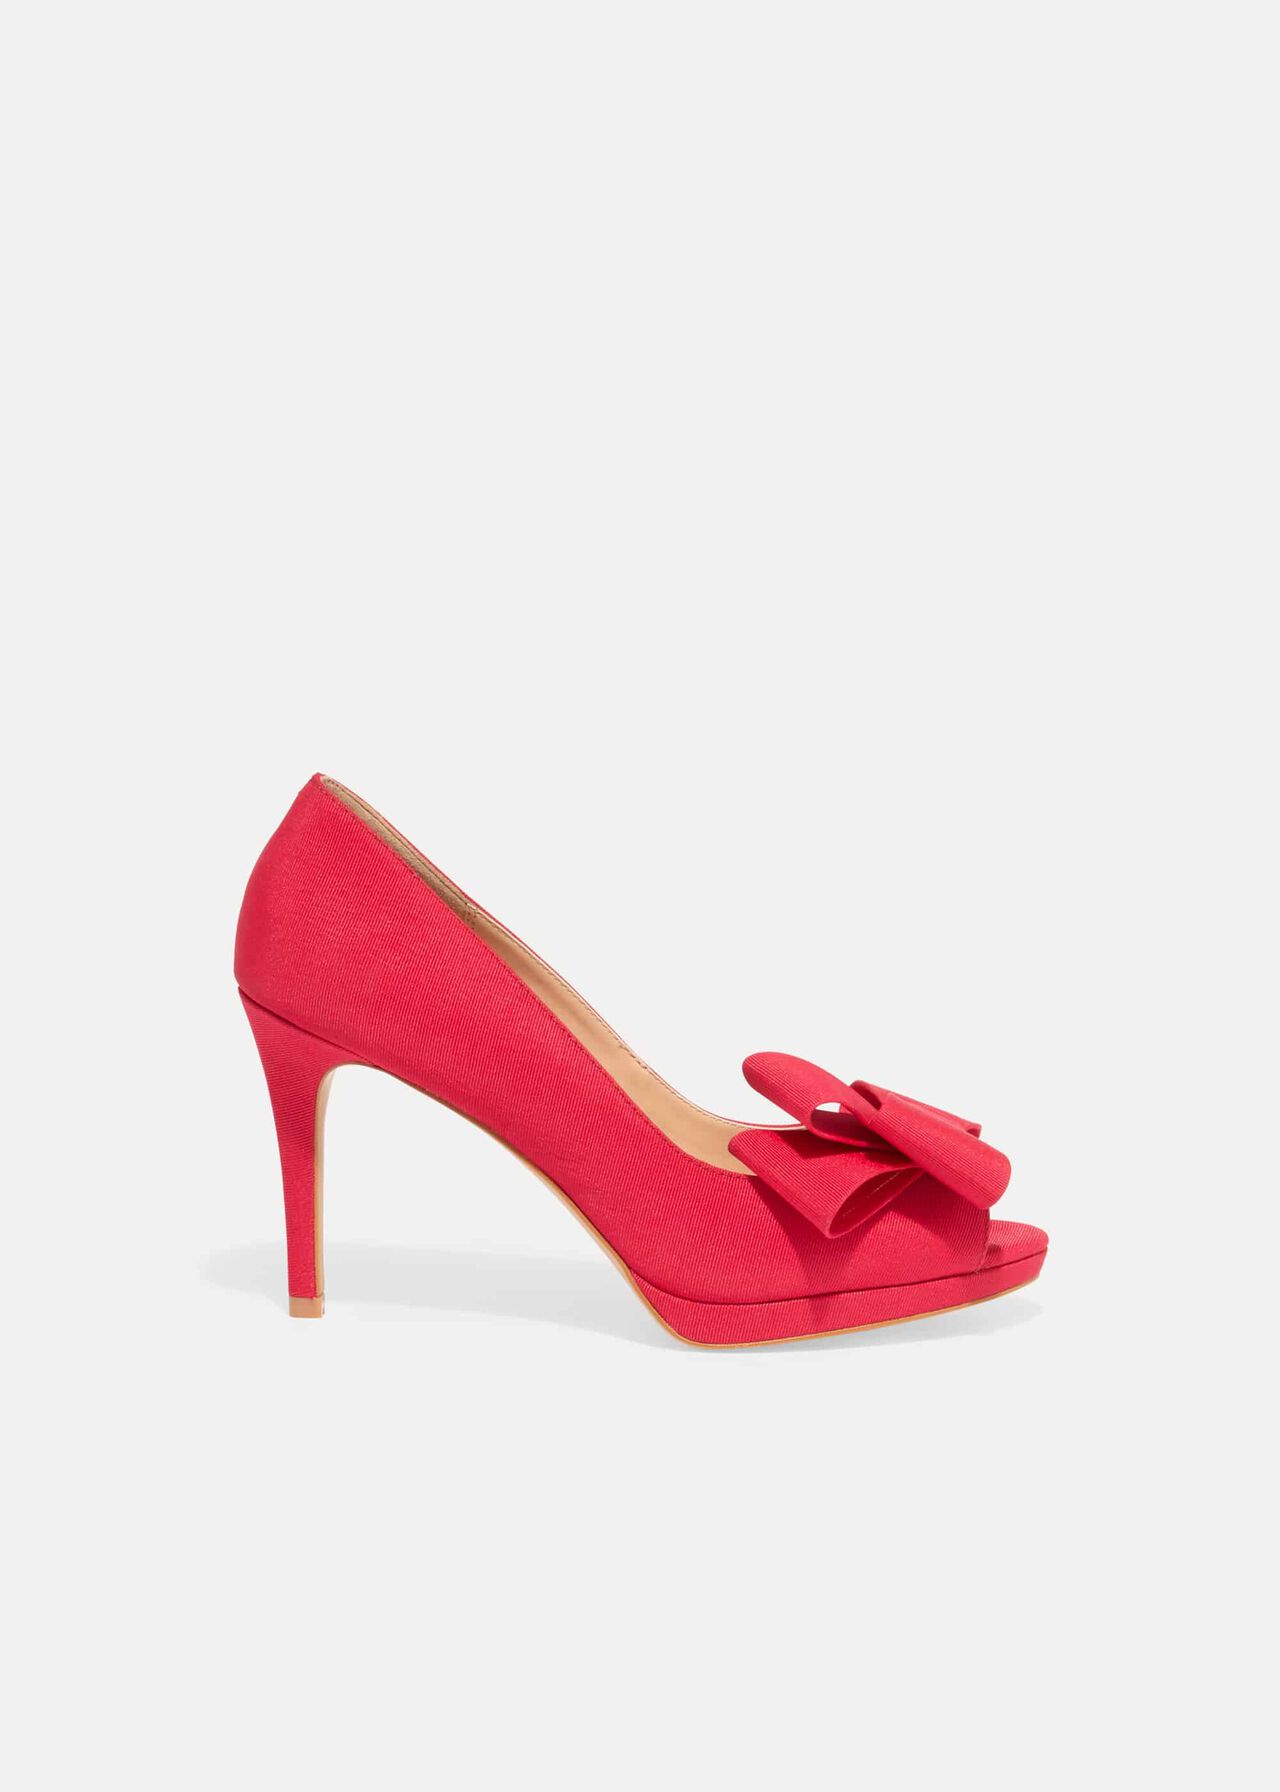 Tilly Peep Toe Shoes